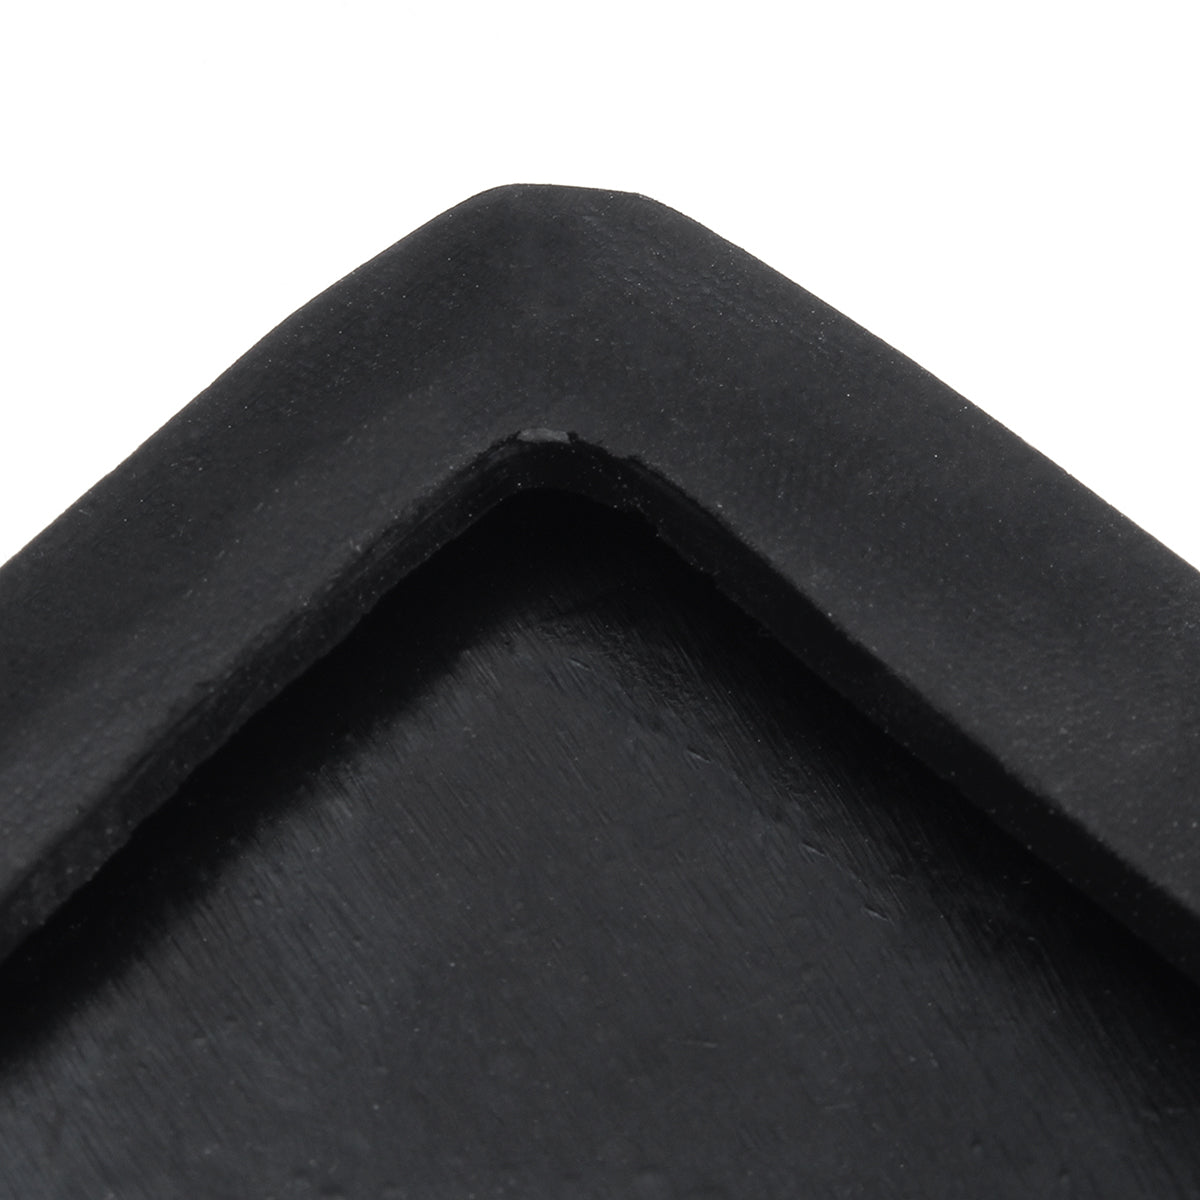 Black Brake Clutch Car Pedal Pad Rubber Cover Trans Vehicles For Toyota 31321-14020 - Auto GoShop